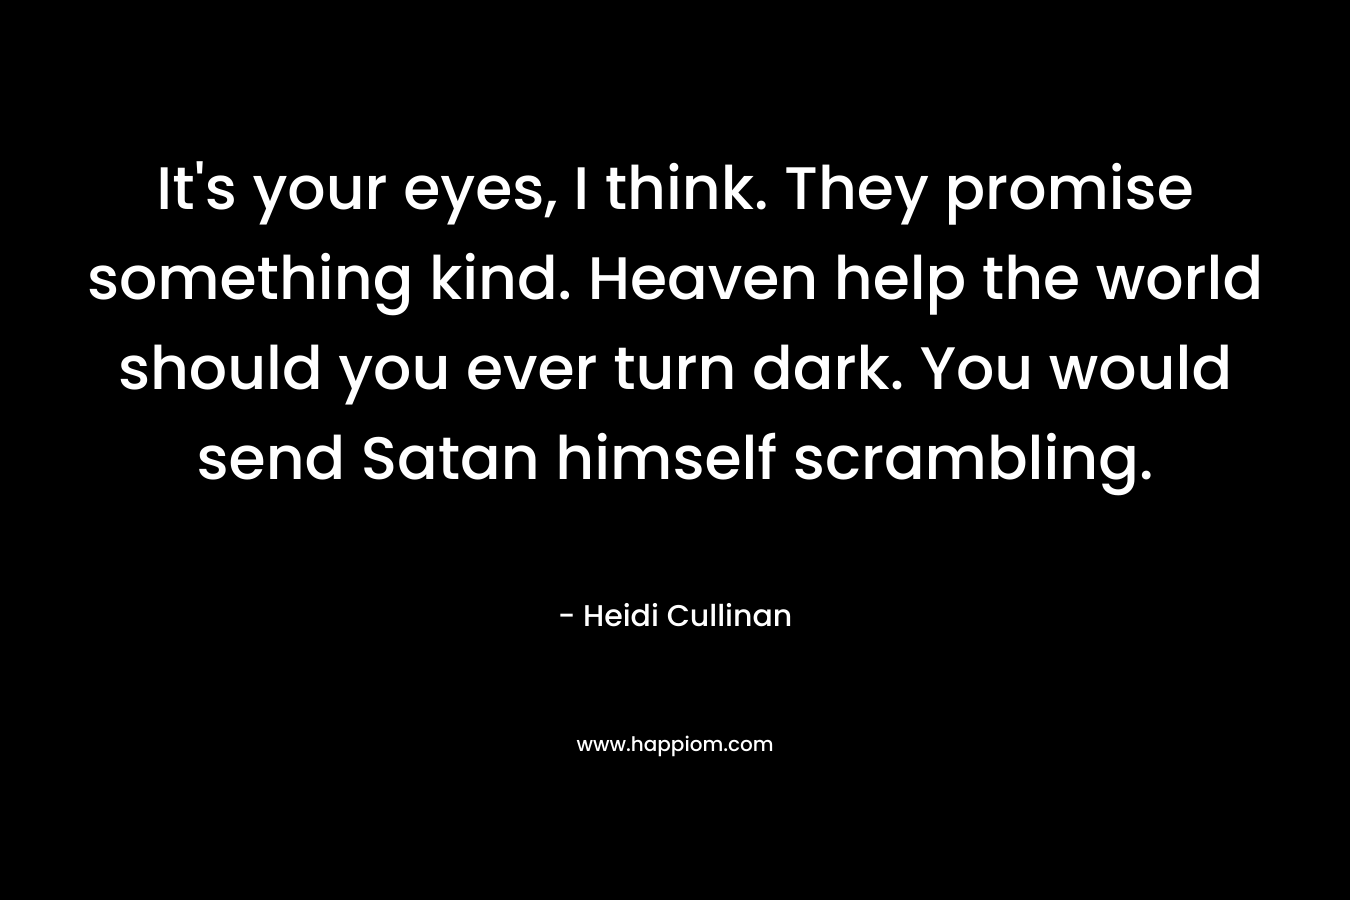 It's your eyes, I think. They promise something kind. Heaven help the world should you ever turn dark. You would send Satan himself scrambling.